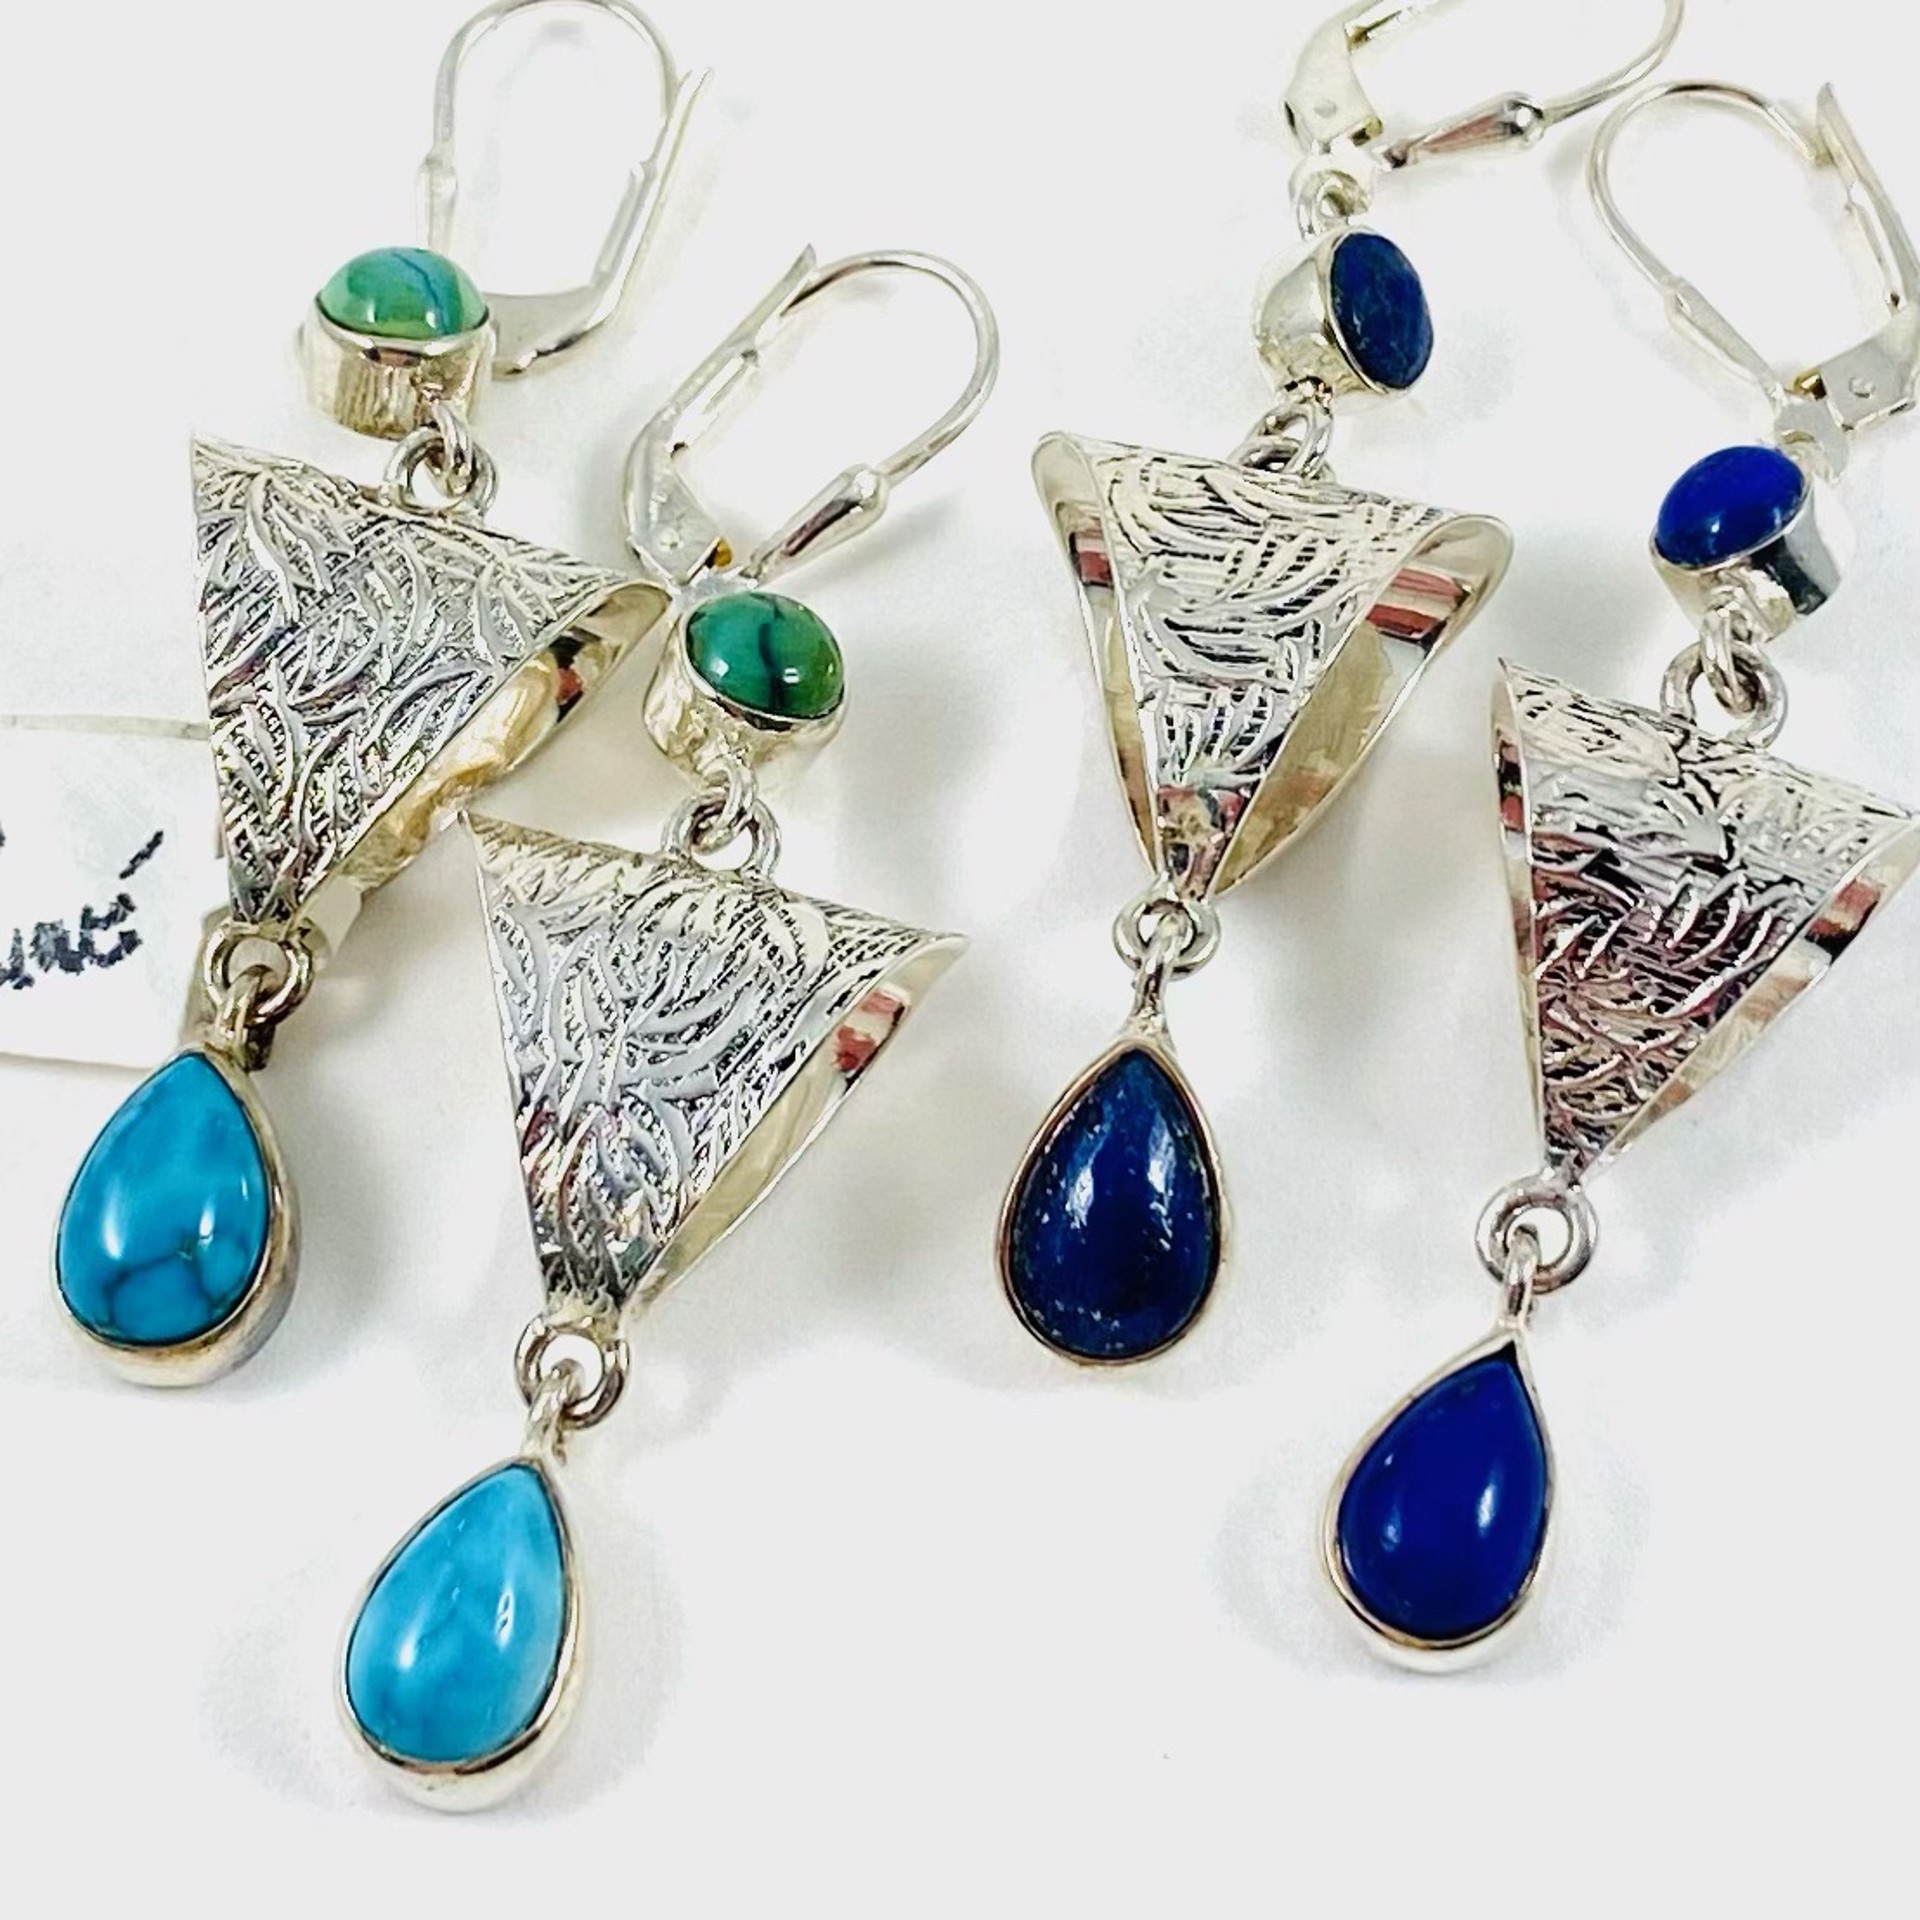 MON 2054 Earrings Turquoise or Lapis LIMITED by Monica Mehta